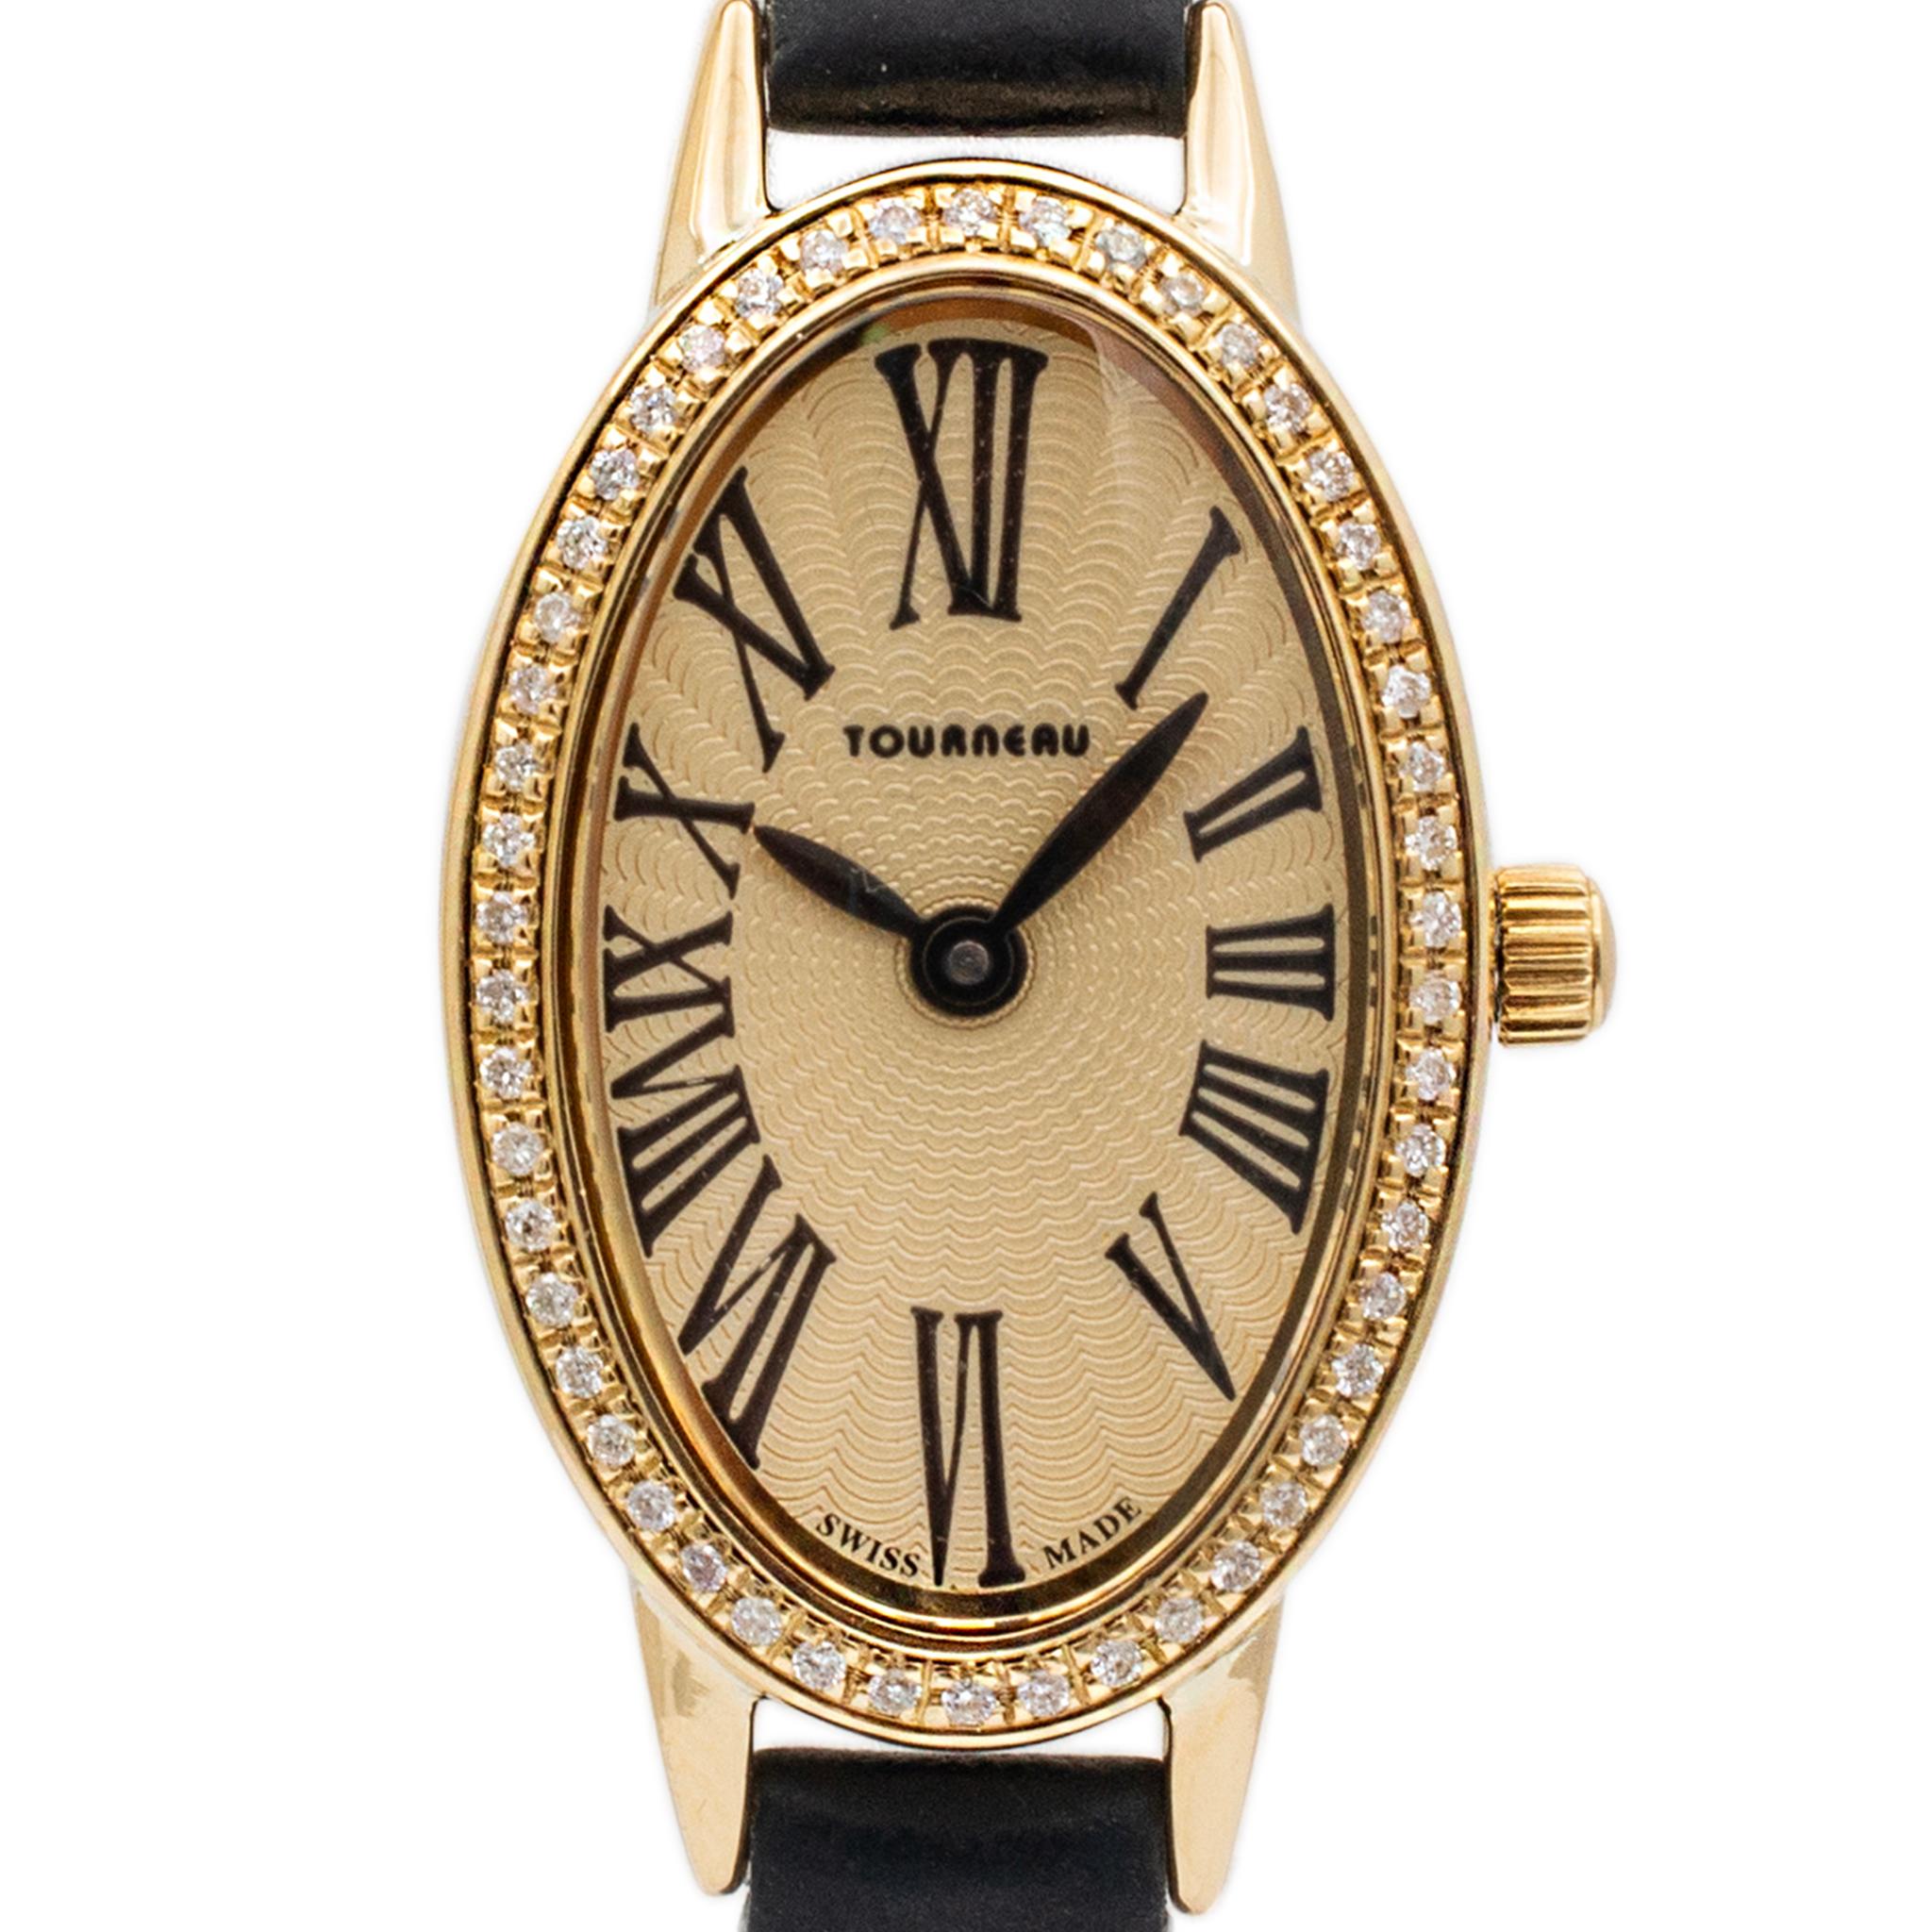 Brand: Tourneau

Gender: Ladies

Metal Type: 18K Yellow Gold

Width: 8.2mm

Length: 8.00 inches

Weight: 18.59 grams

Ladies 18K yellow gold diamond Swiss made wristwatch. Engraved with 